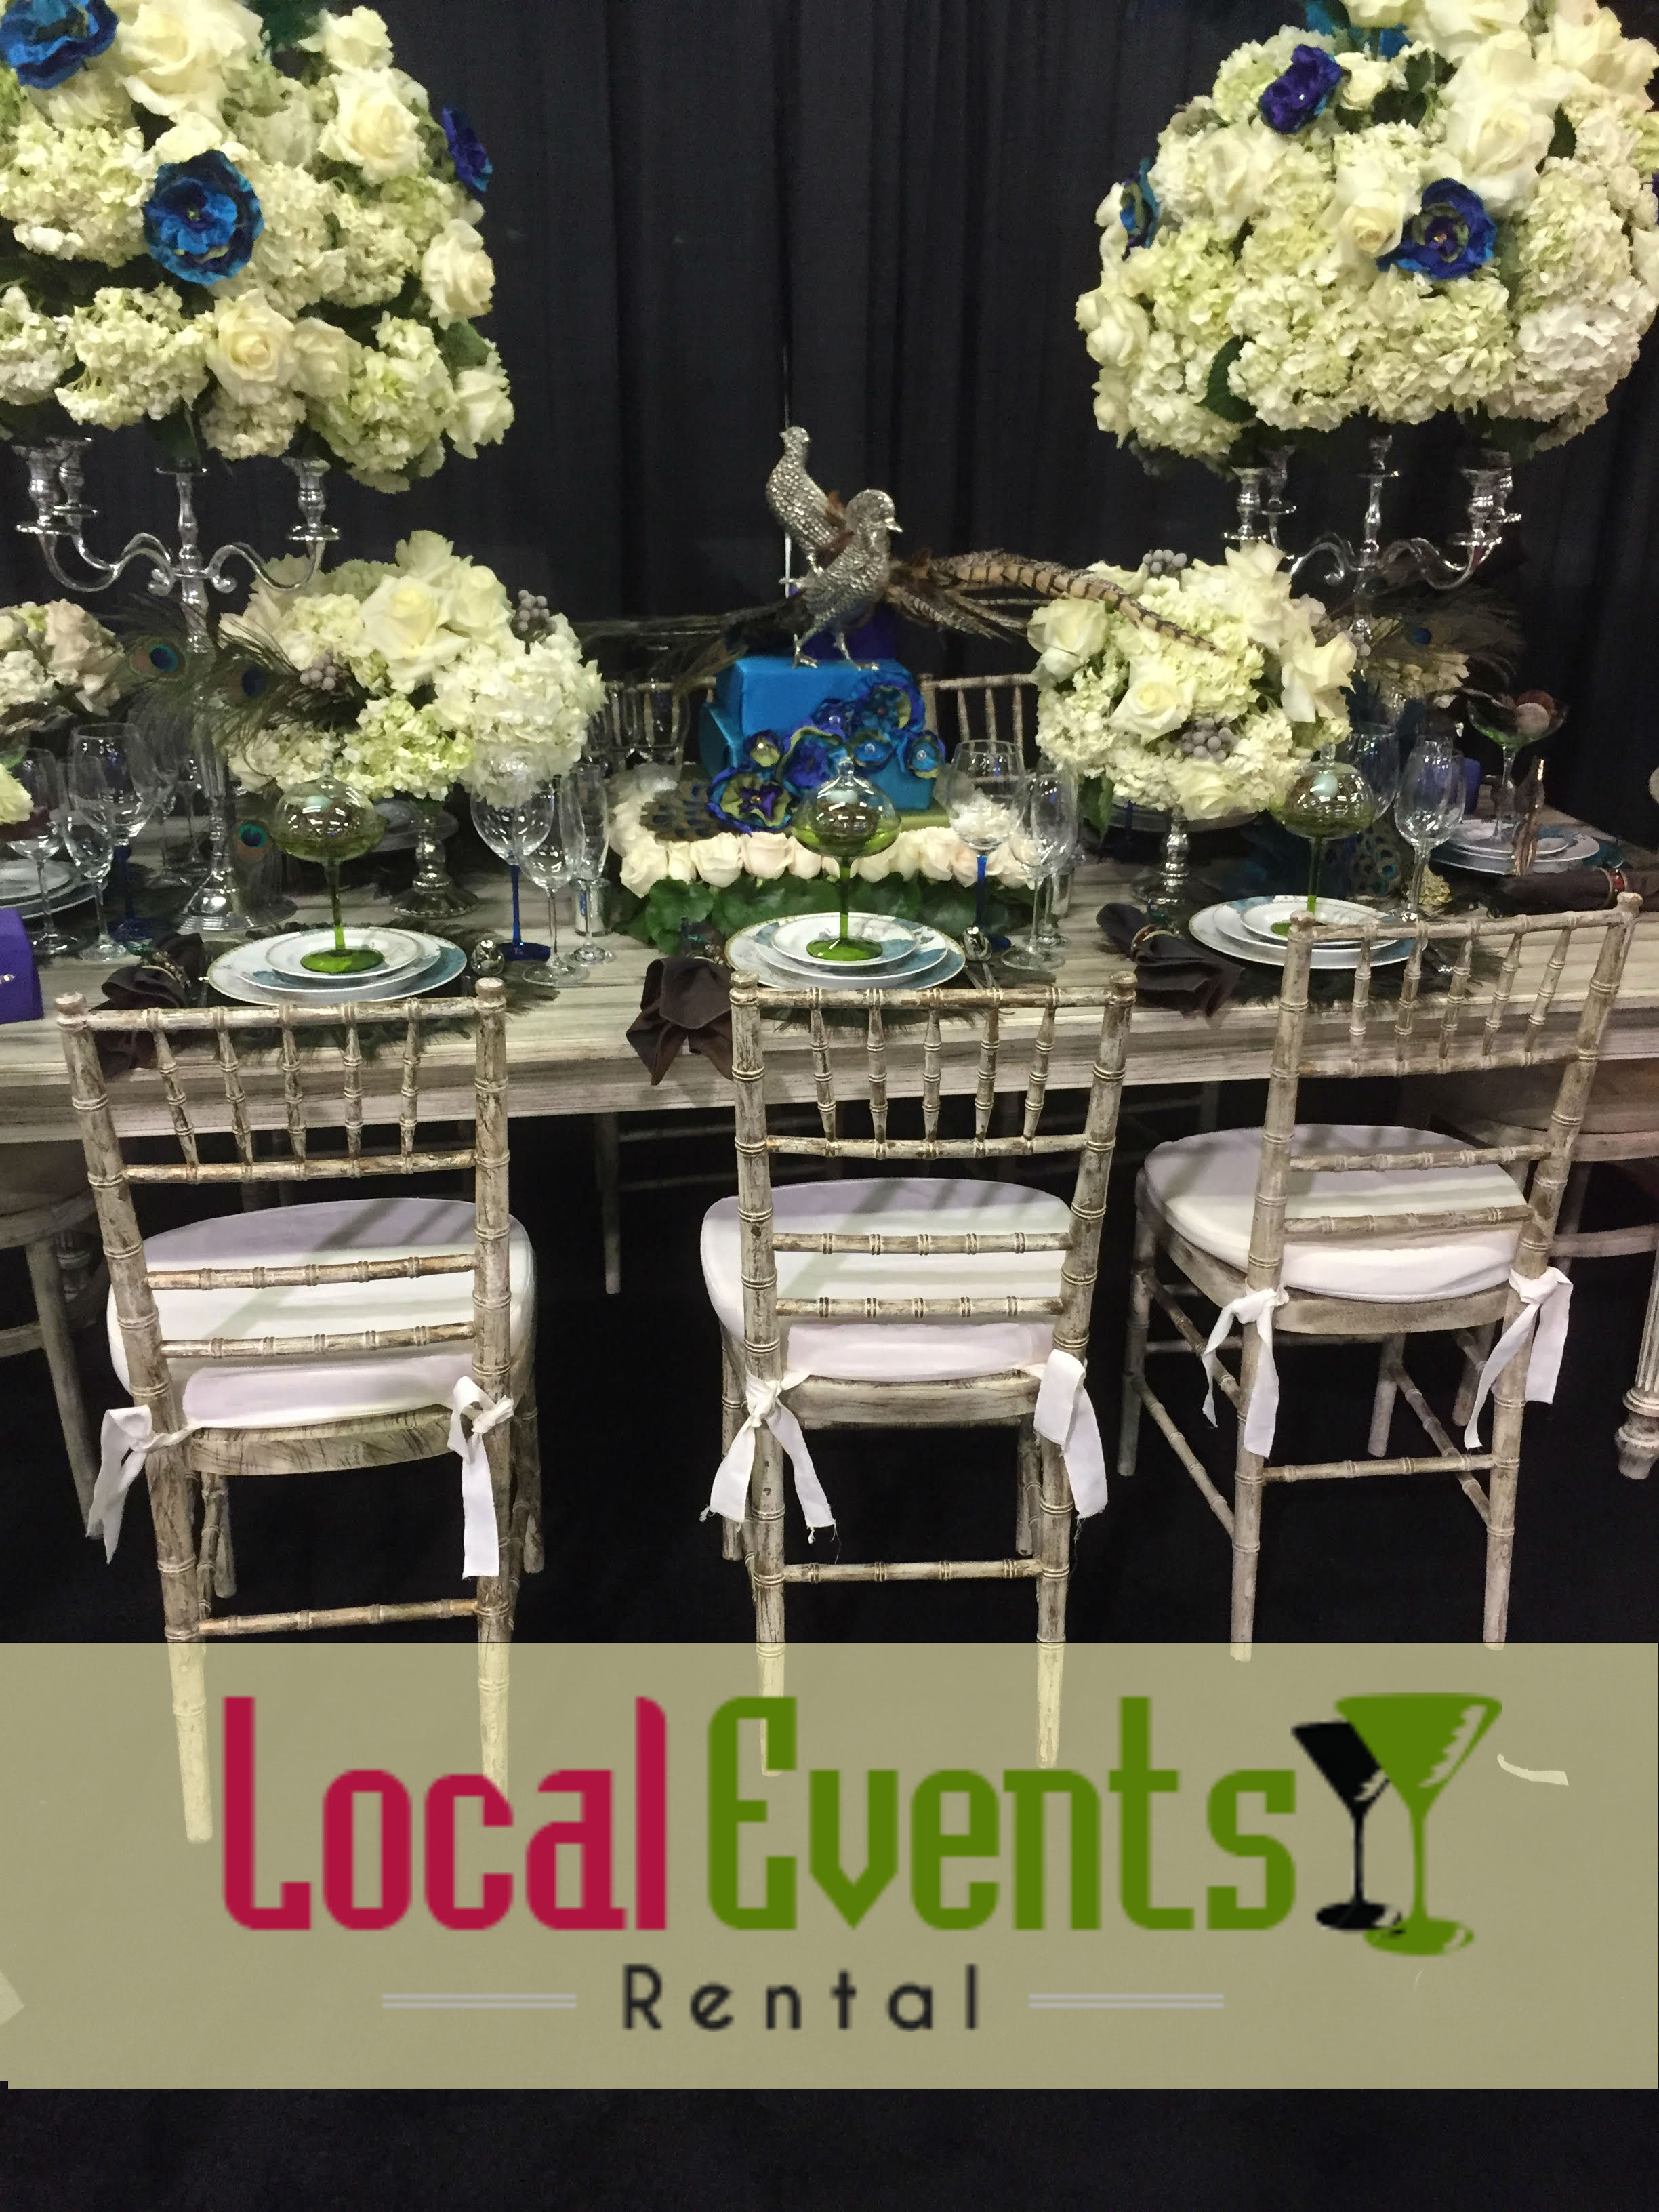 Gallery Local Events Rental  Local Events Rental 